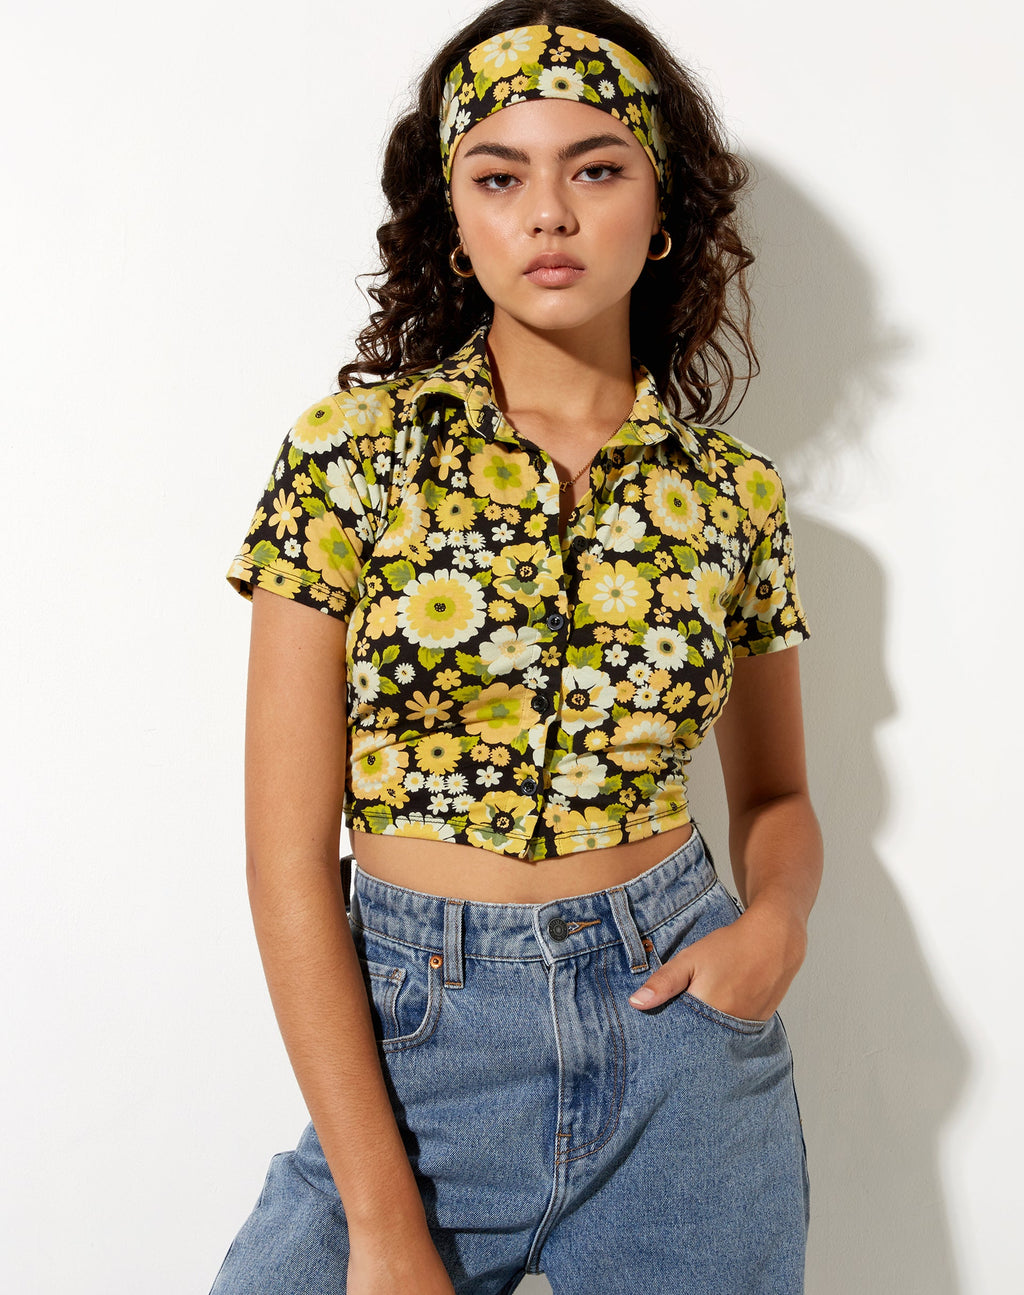 Wuma Cropped Shirt in Retro Floral